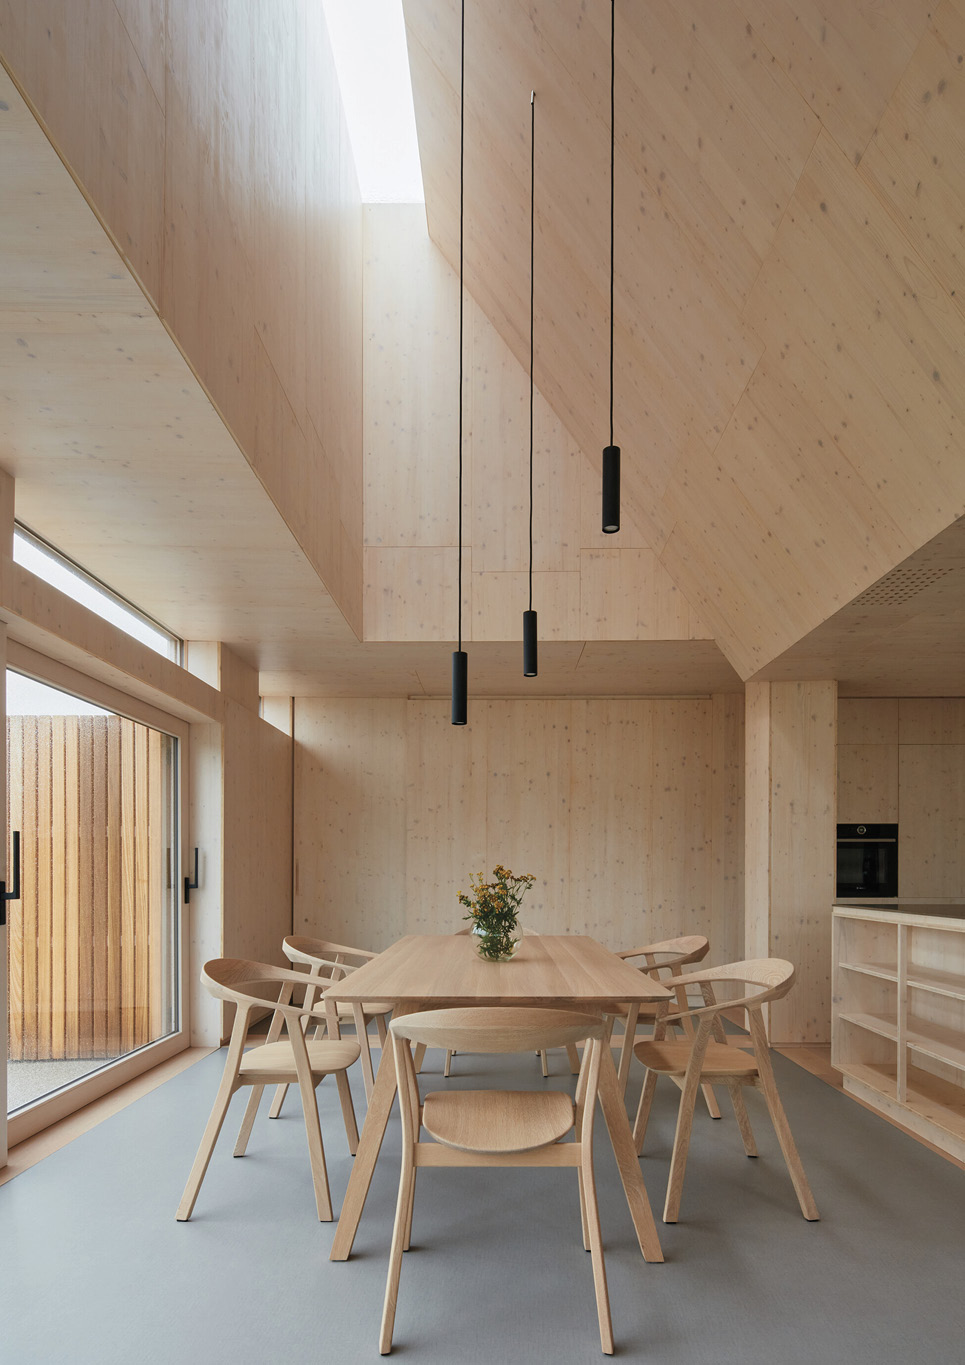 A dining area surrounded by wooden walls and ceilings inside Warm Nest, a Maggie care facility.